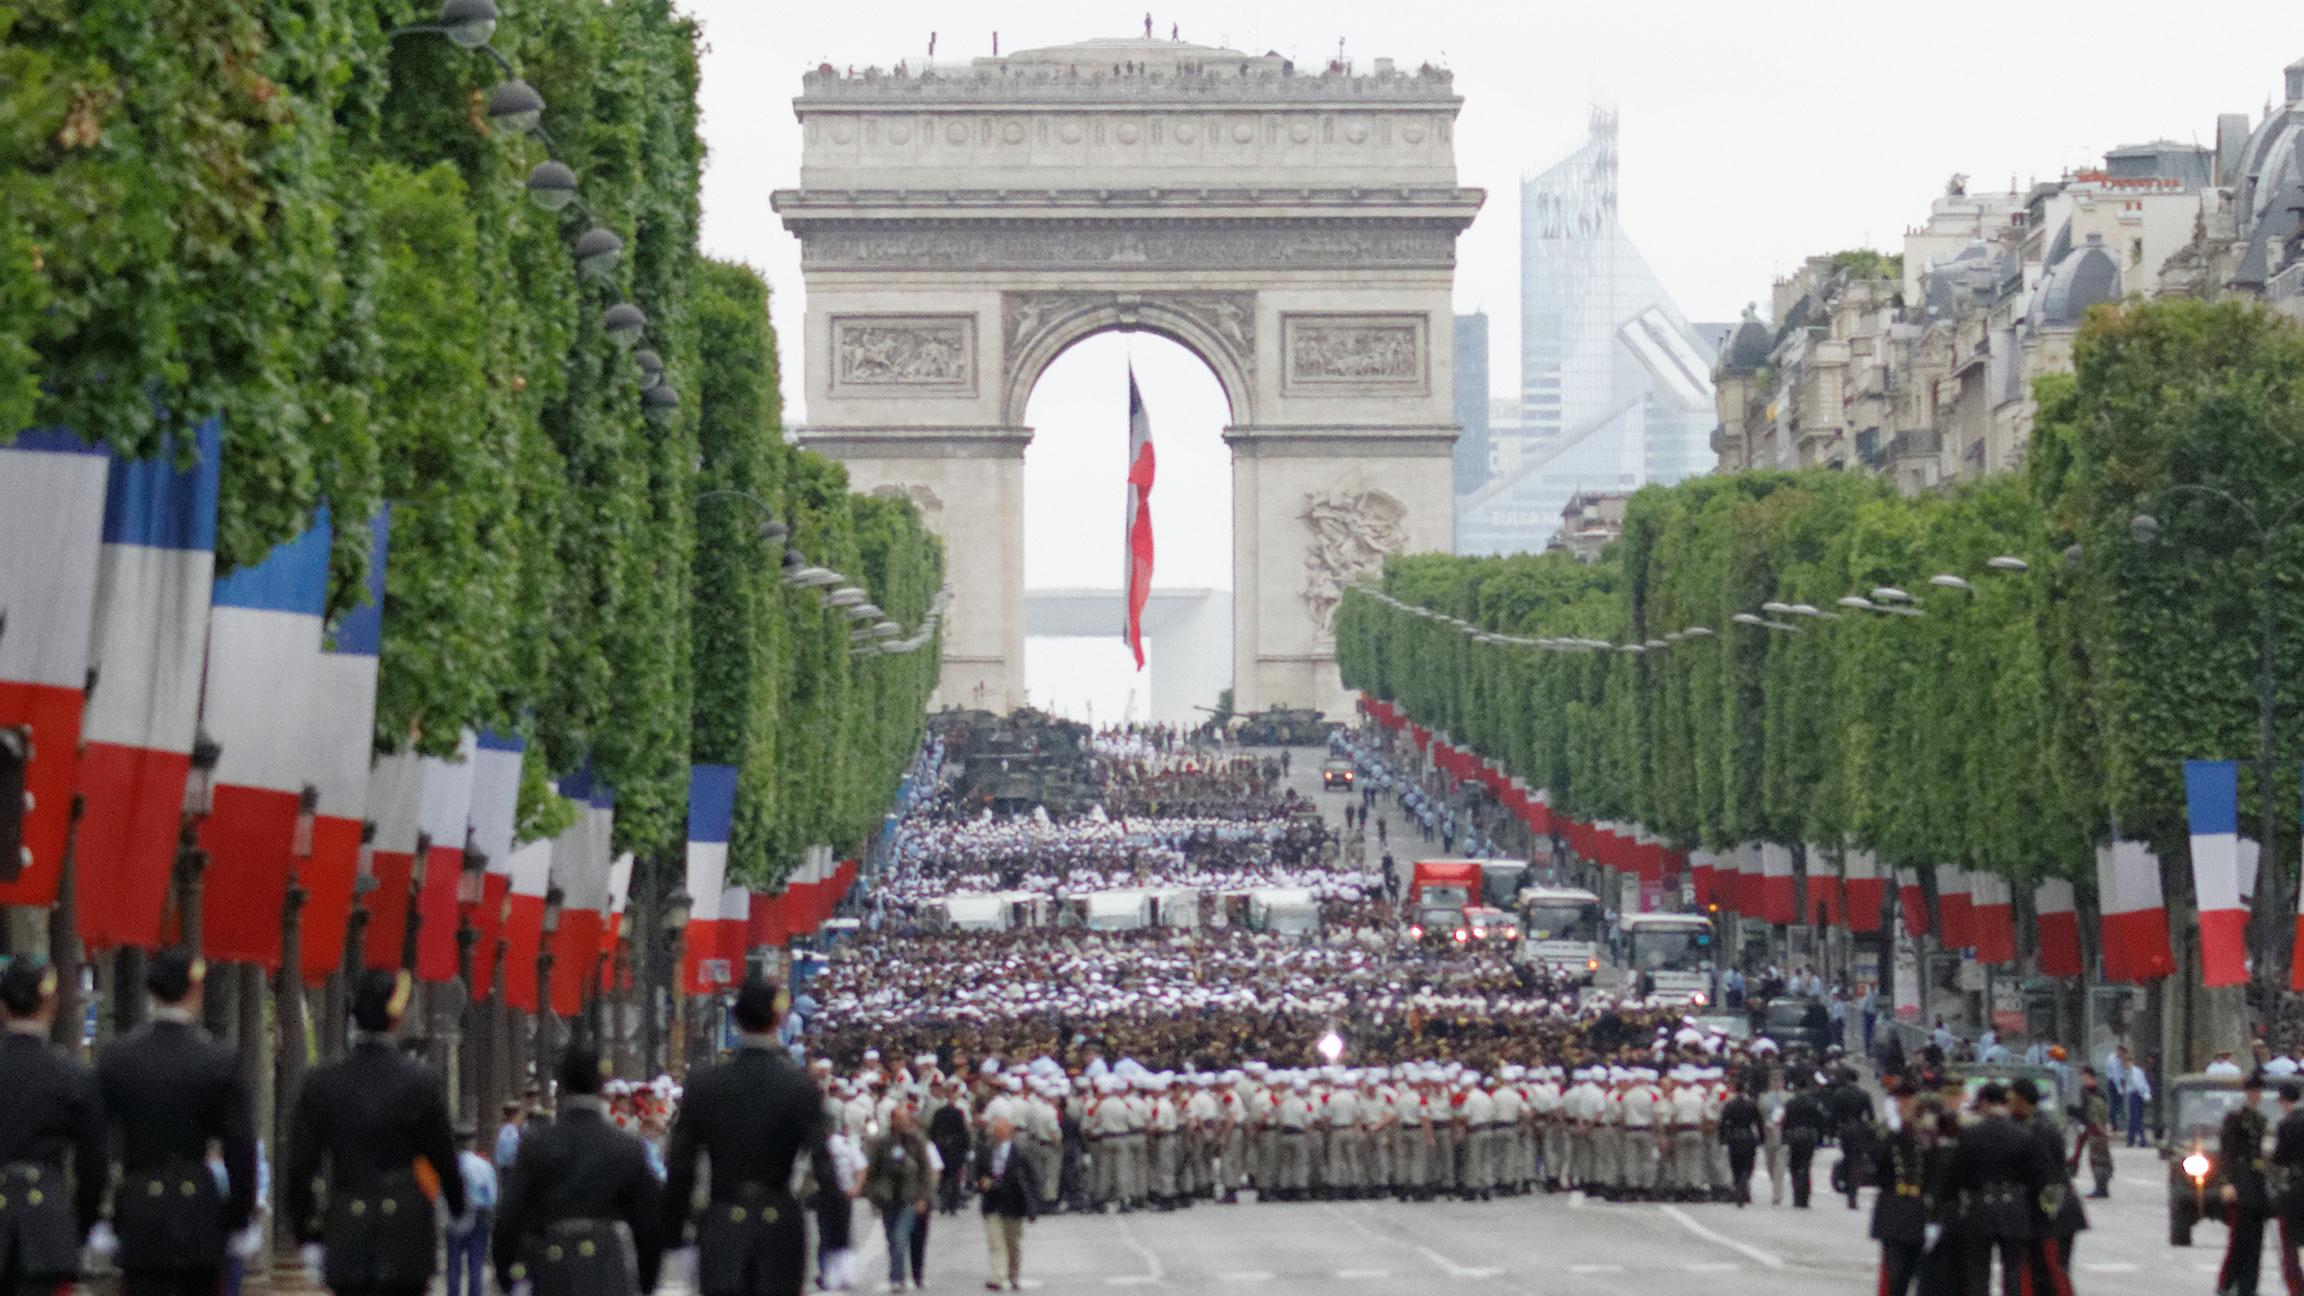 Bastille Day 2014 military parade on the Champs-Élysées in Paris. (Pierre-Yves Beaudouin / Wikimedia Commons)